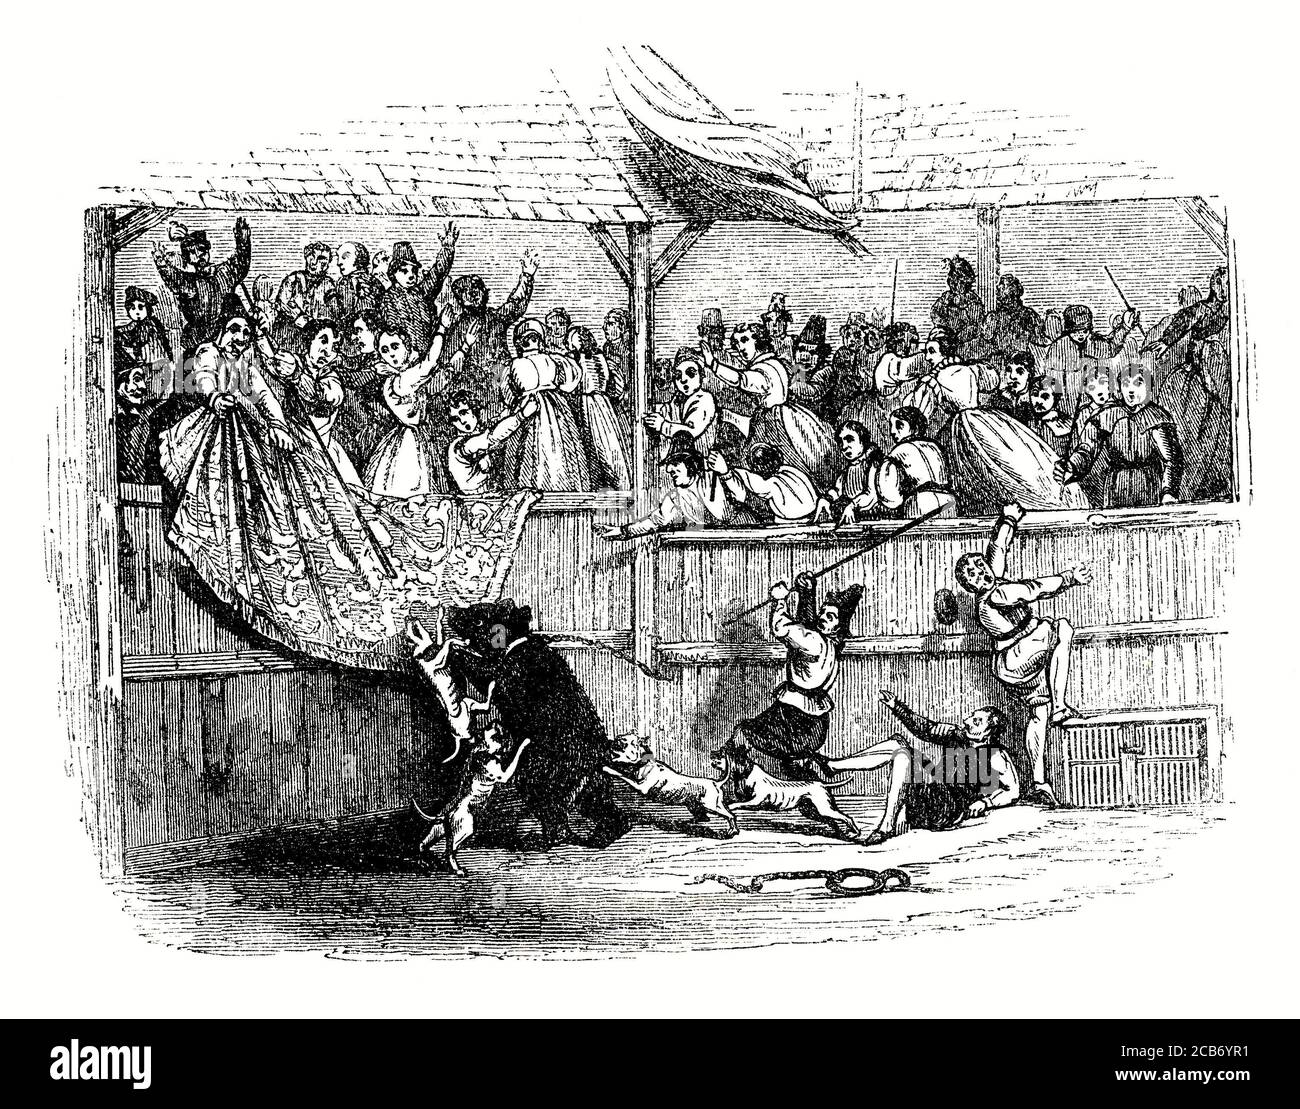 An old engraving of bear-baiting with dogs in medieval times. Bear-baiting is a blood sport involving the worrying or tormenting (baiting) of bears with dogs. Arenas for this activity were called bear-gardens, consisting of a circular high fenced area (the 'pit') and seating for spectators. A post would be set in the ground and the bear chained to it, either by the leg or neck. A number of trained fighting or baiting dogs, usually Old English Bulldogs, would then be set on it. Sometimes (as in this engraving) the bear was let loose, allowing it to chase after animals or people. Stock Photo